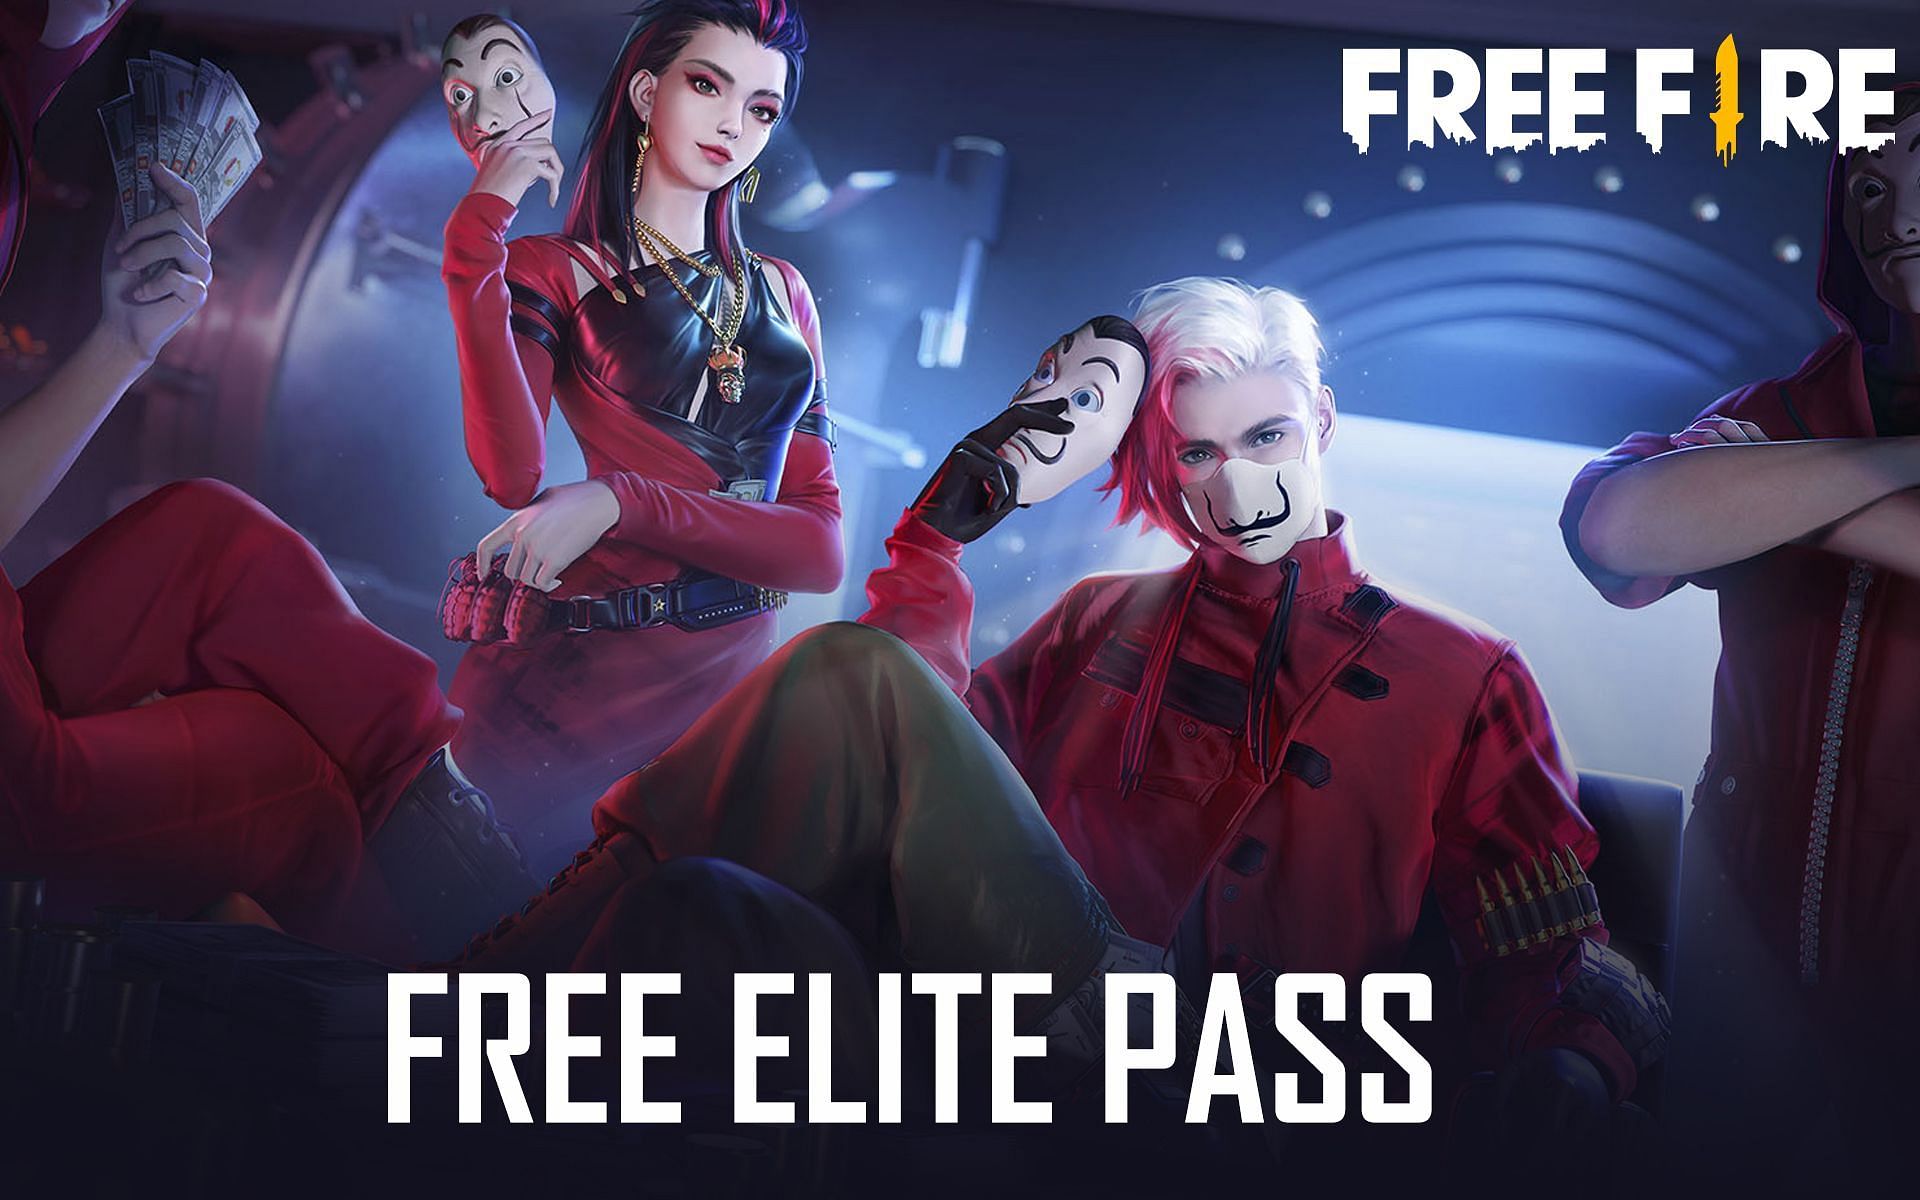 There are several ways to get a free Elite Pass in Free Fire (Image via Sportskeeda)